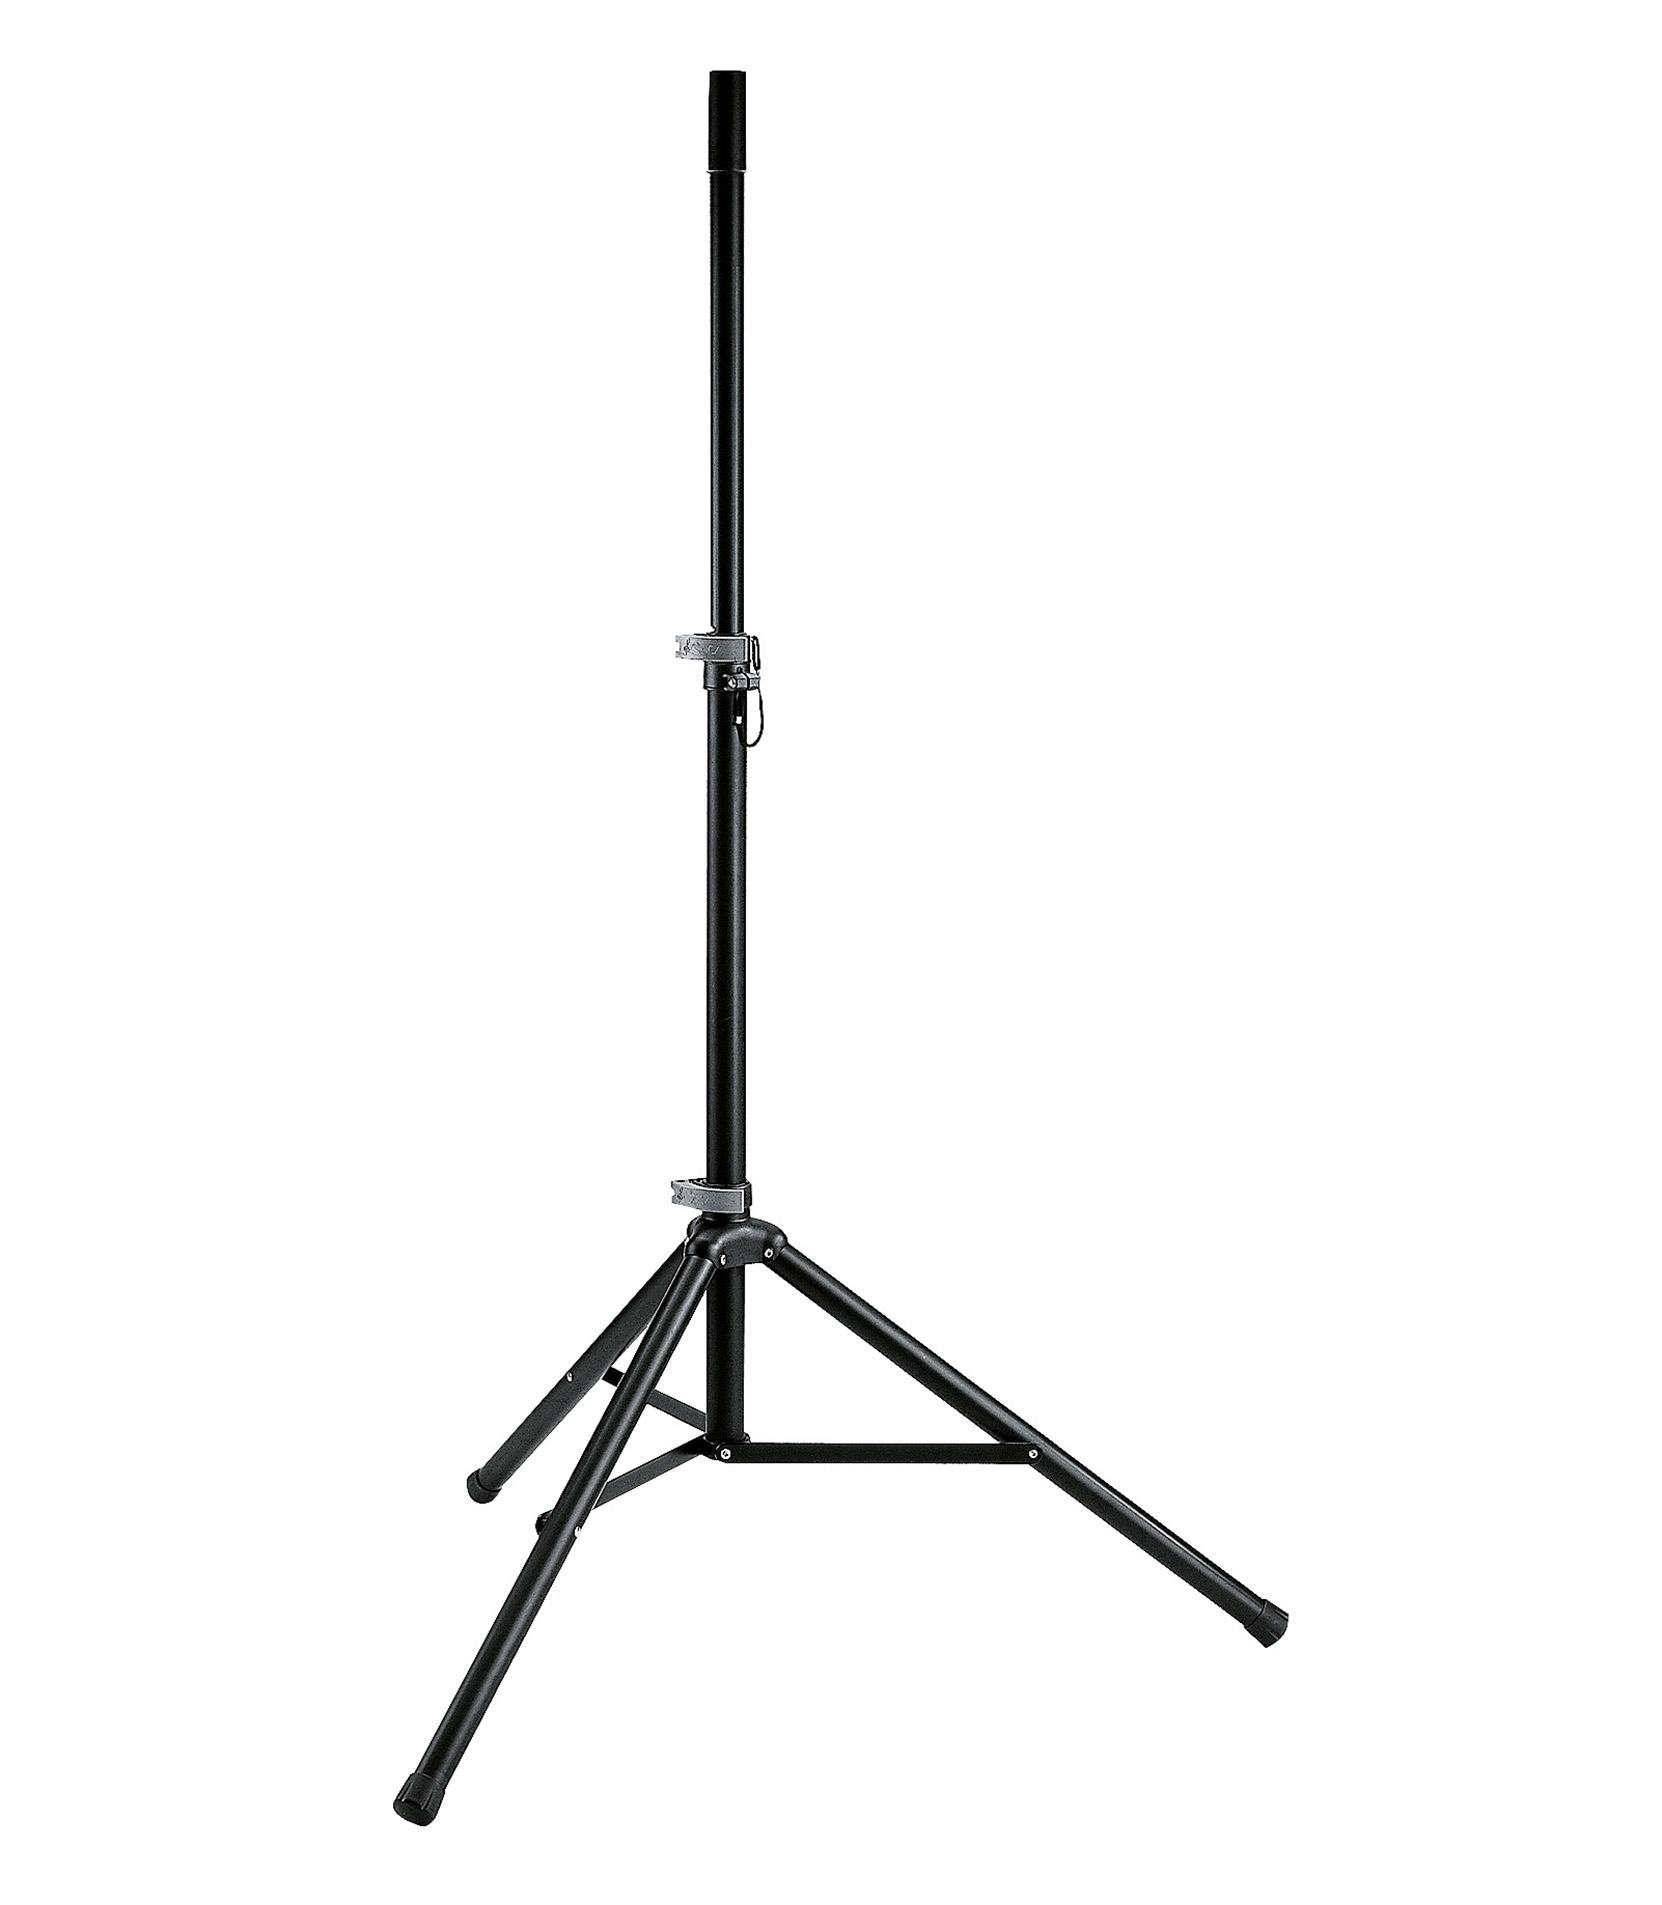 buy k&m speaker stand made of high quality aluminum